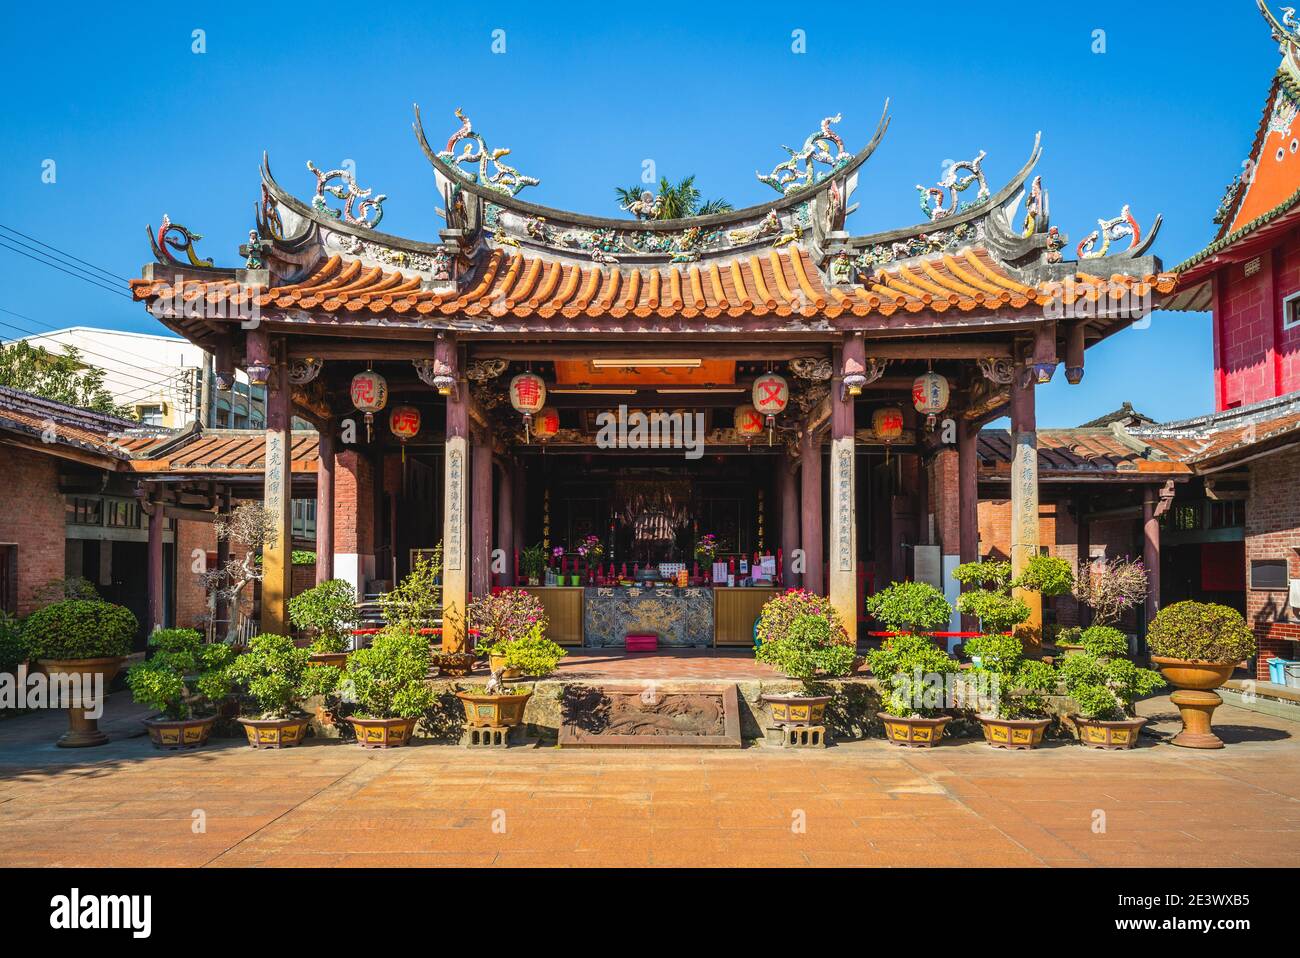 January 13, 2021: Jhen Wen Academy, a former tutorial academy in Xiluo Township, Yunlin, Taiwan, was originally built in 1797 as Wen Chang Temple to w Stock Photo